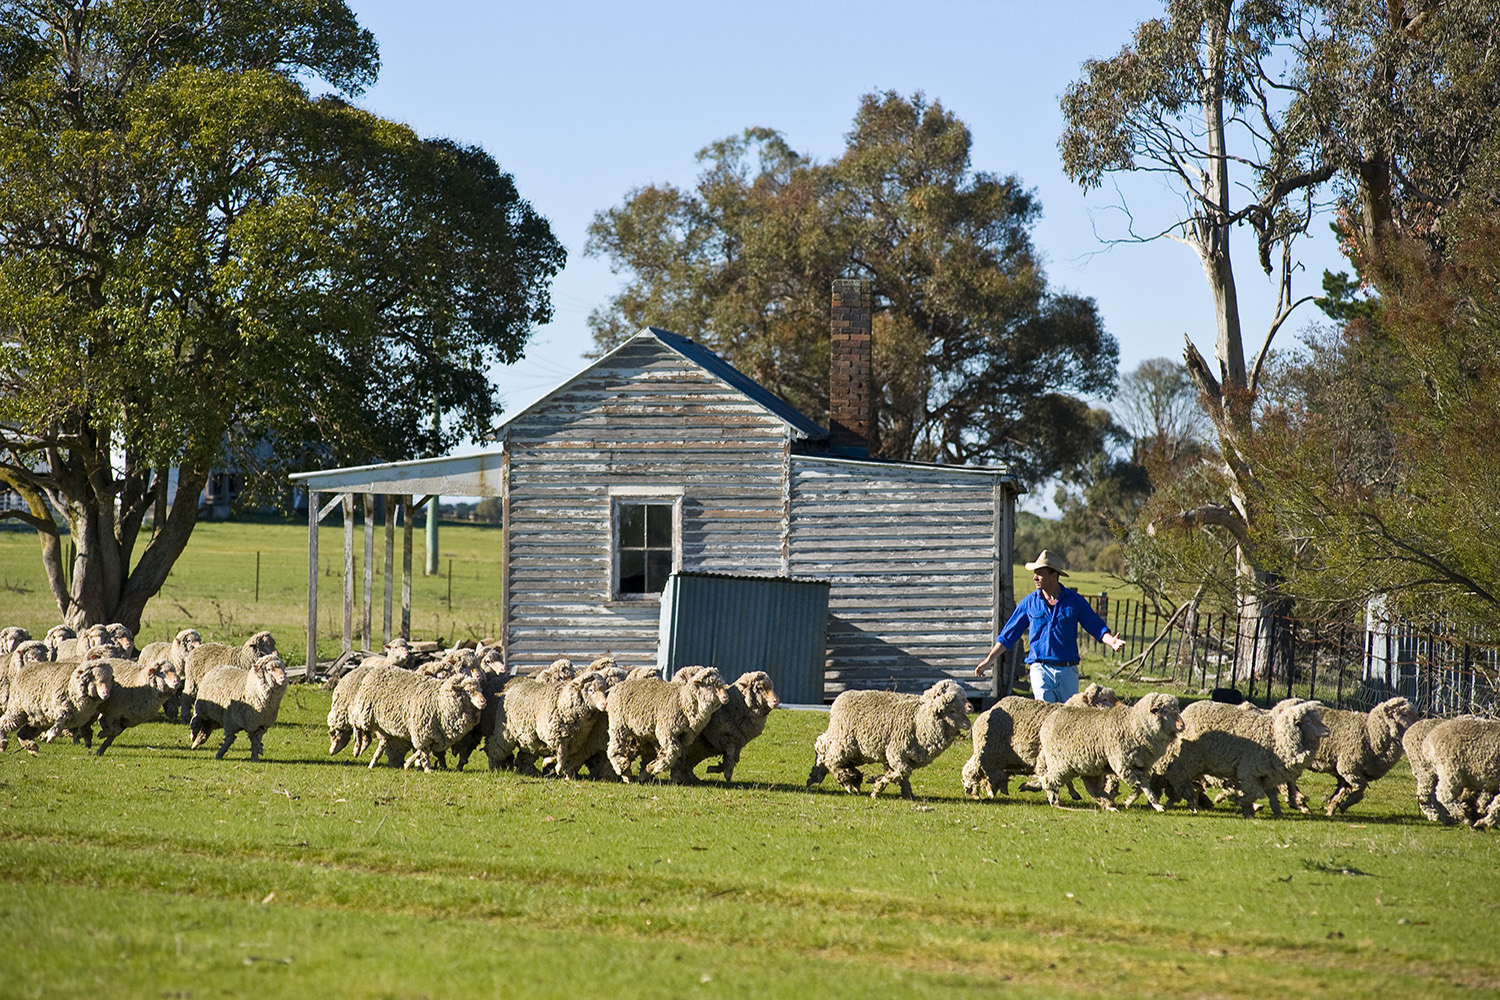 image of AARONTAIT COPYRIGHTED 2014 371 MUSTER RURAL PHOTOGRAPHER FARM LIFE AGRICULTURE WOOL BEEF STOCKMAN MUSTER CATTLE FARM AUSTRALIAN FLOCK SHEEP